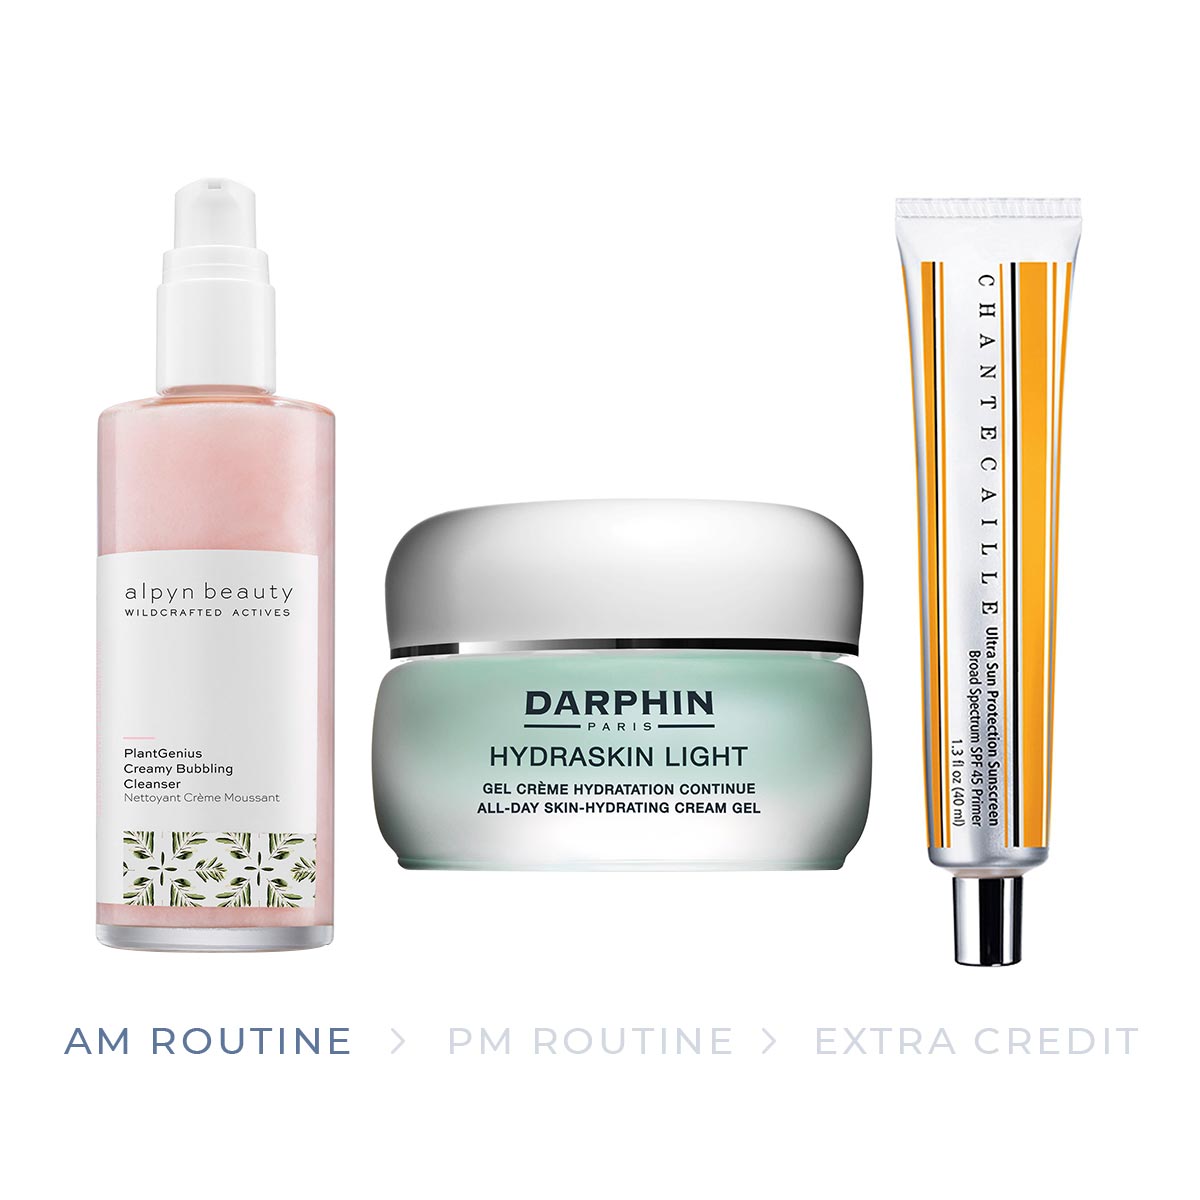 The products for the AM part of the combination skin skincare routine